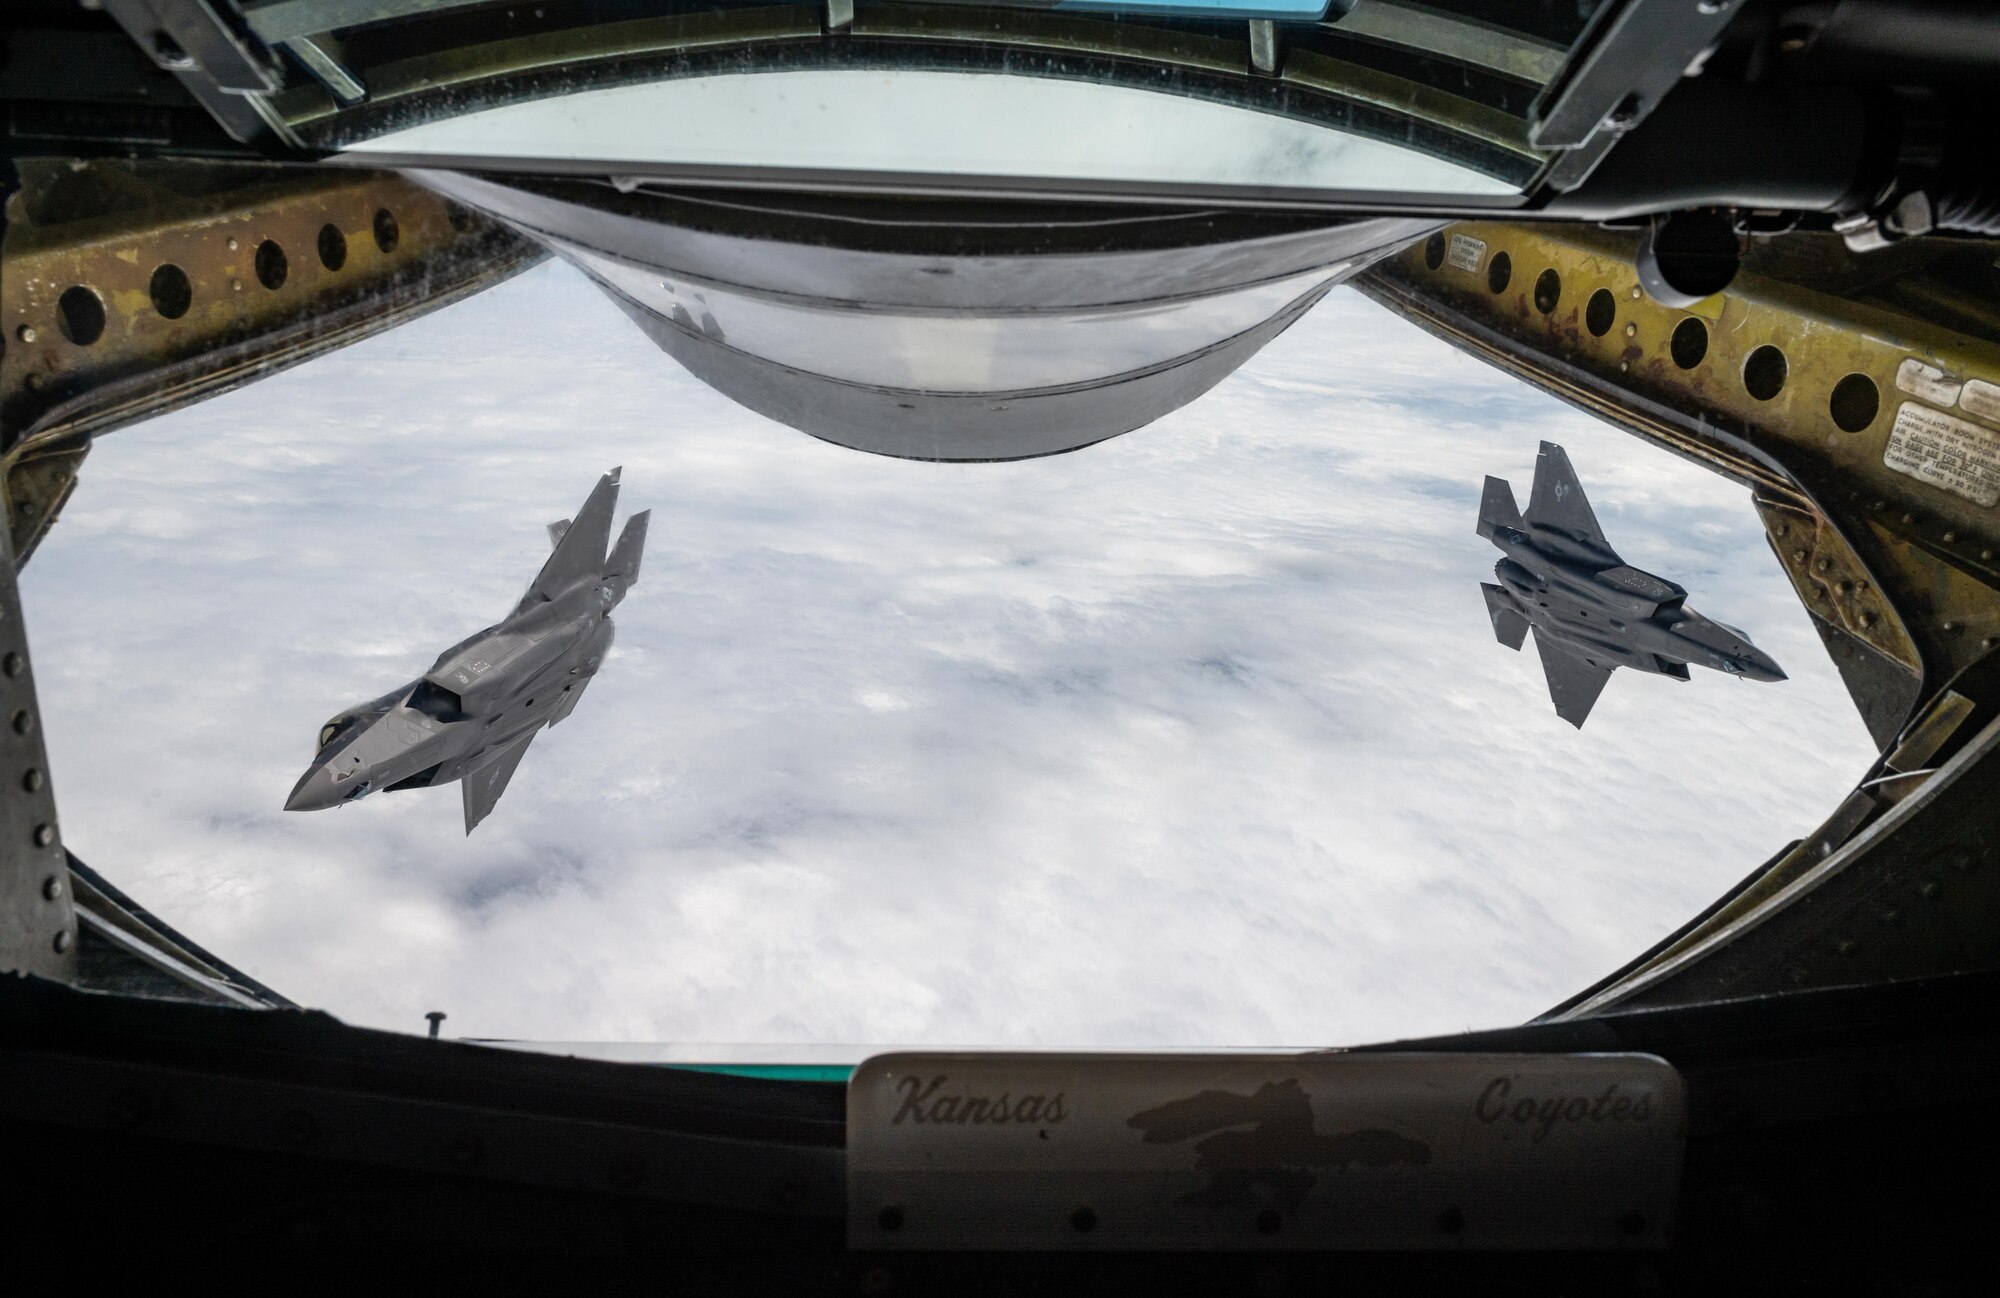 Two F-35 departing from a KC-135